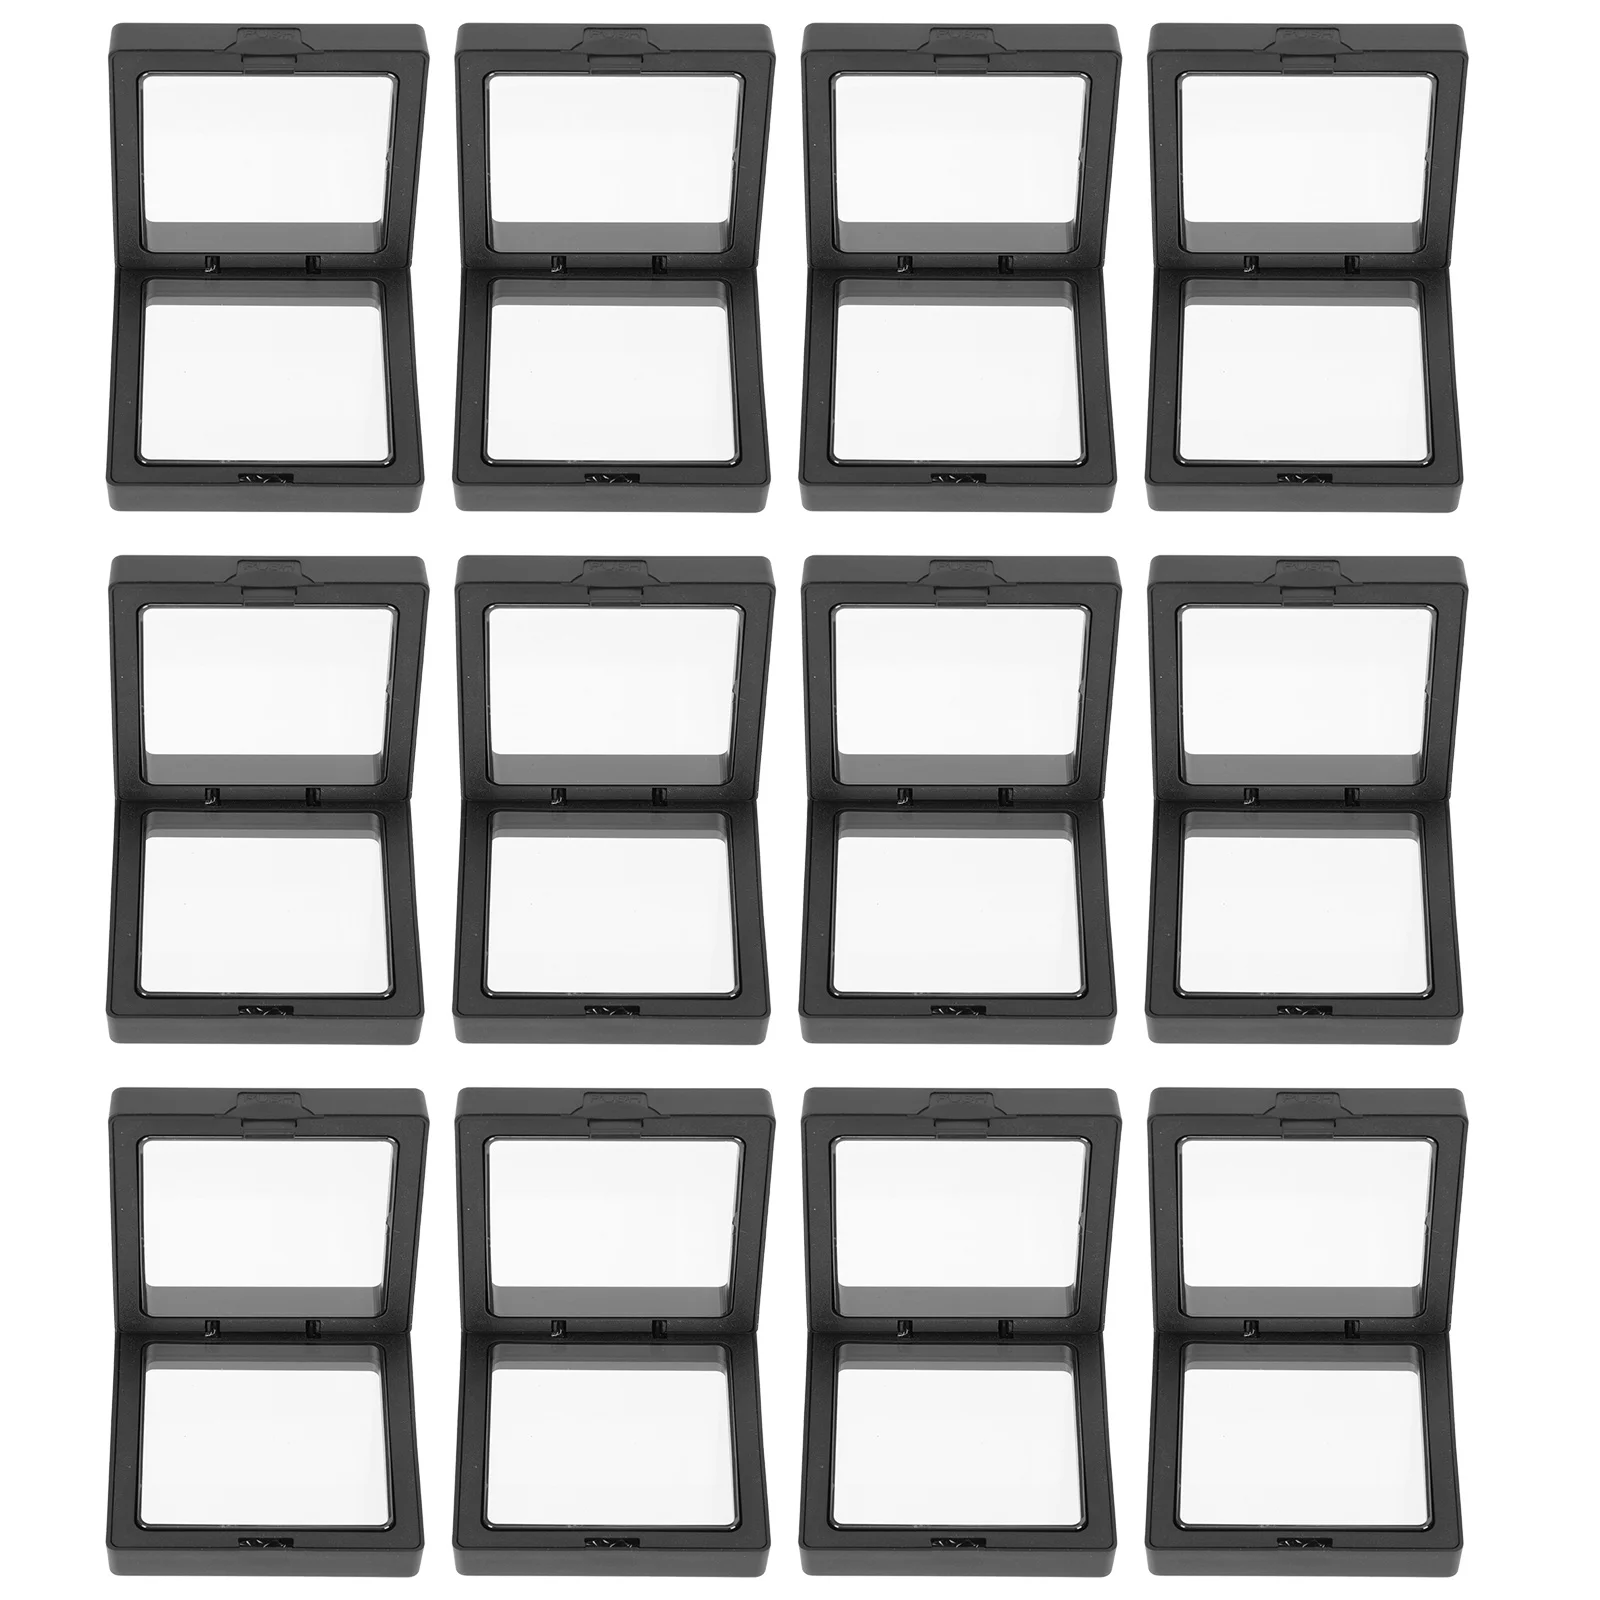 

20 Pcs Floating Box Portable Monitor Mount Useful Coin Holder Display Storage Plastic Kit Delicate Jewelry Case Collect Stand